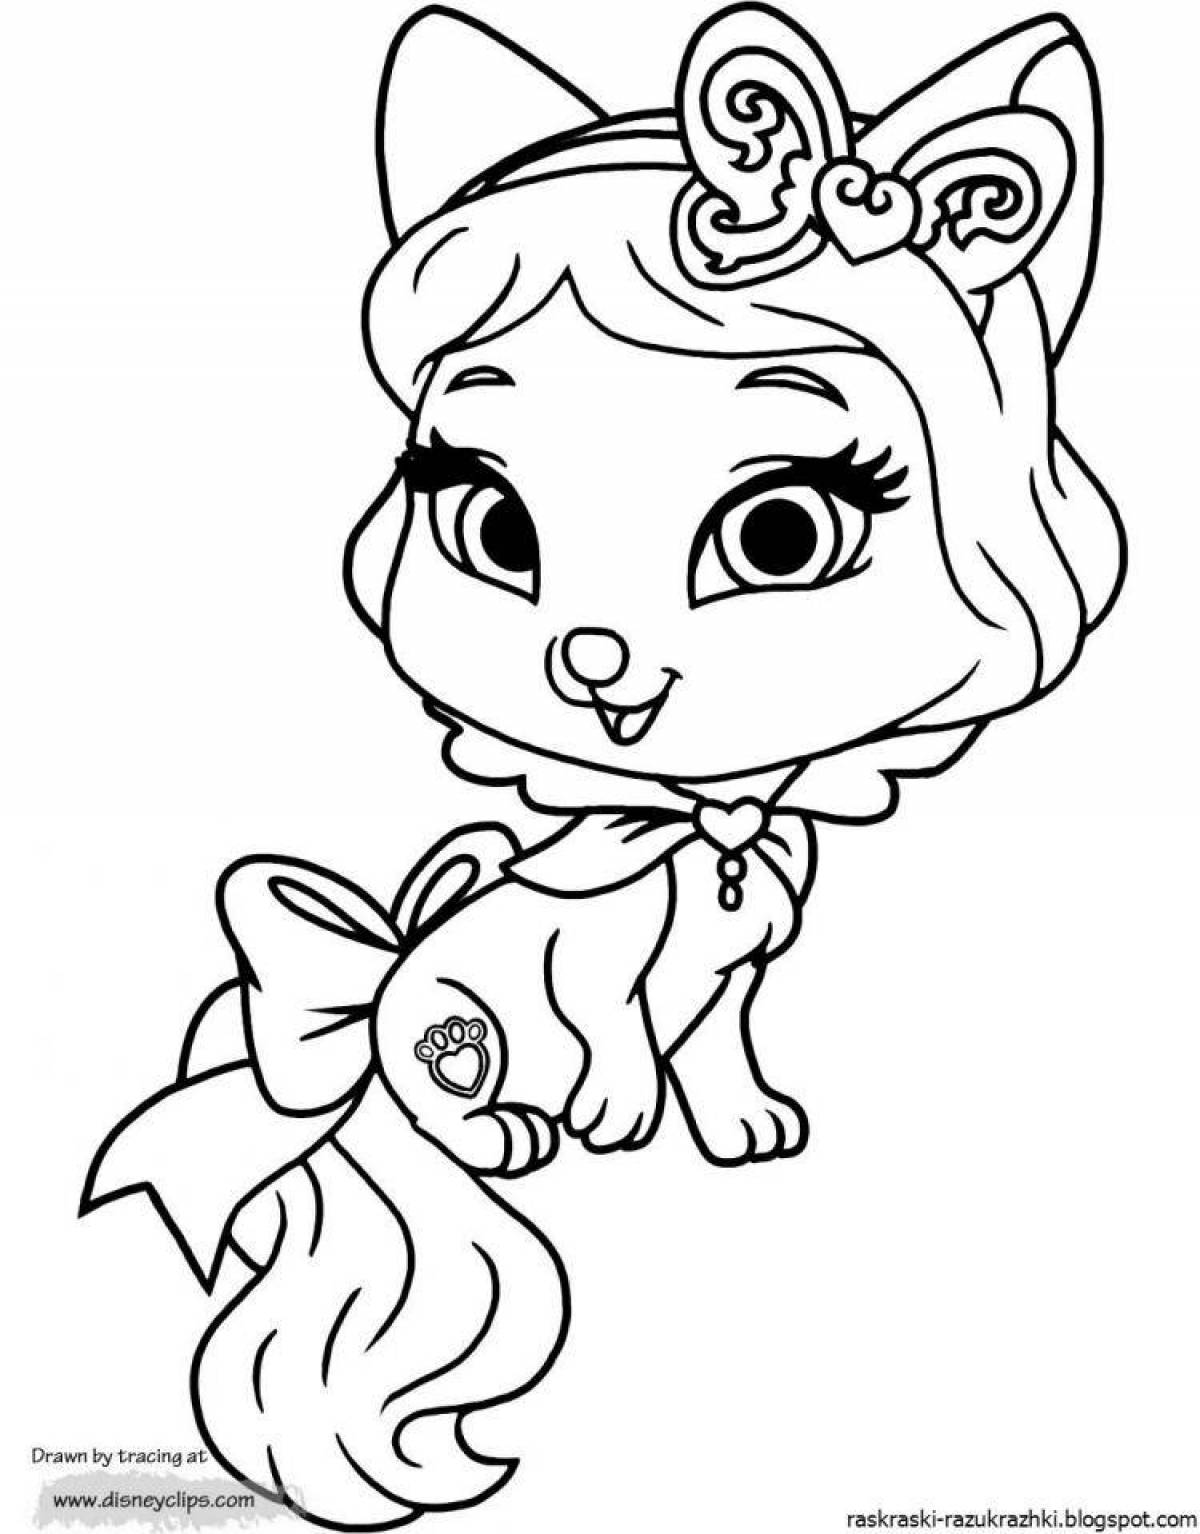 Nimble coloring kitty with a bow